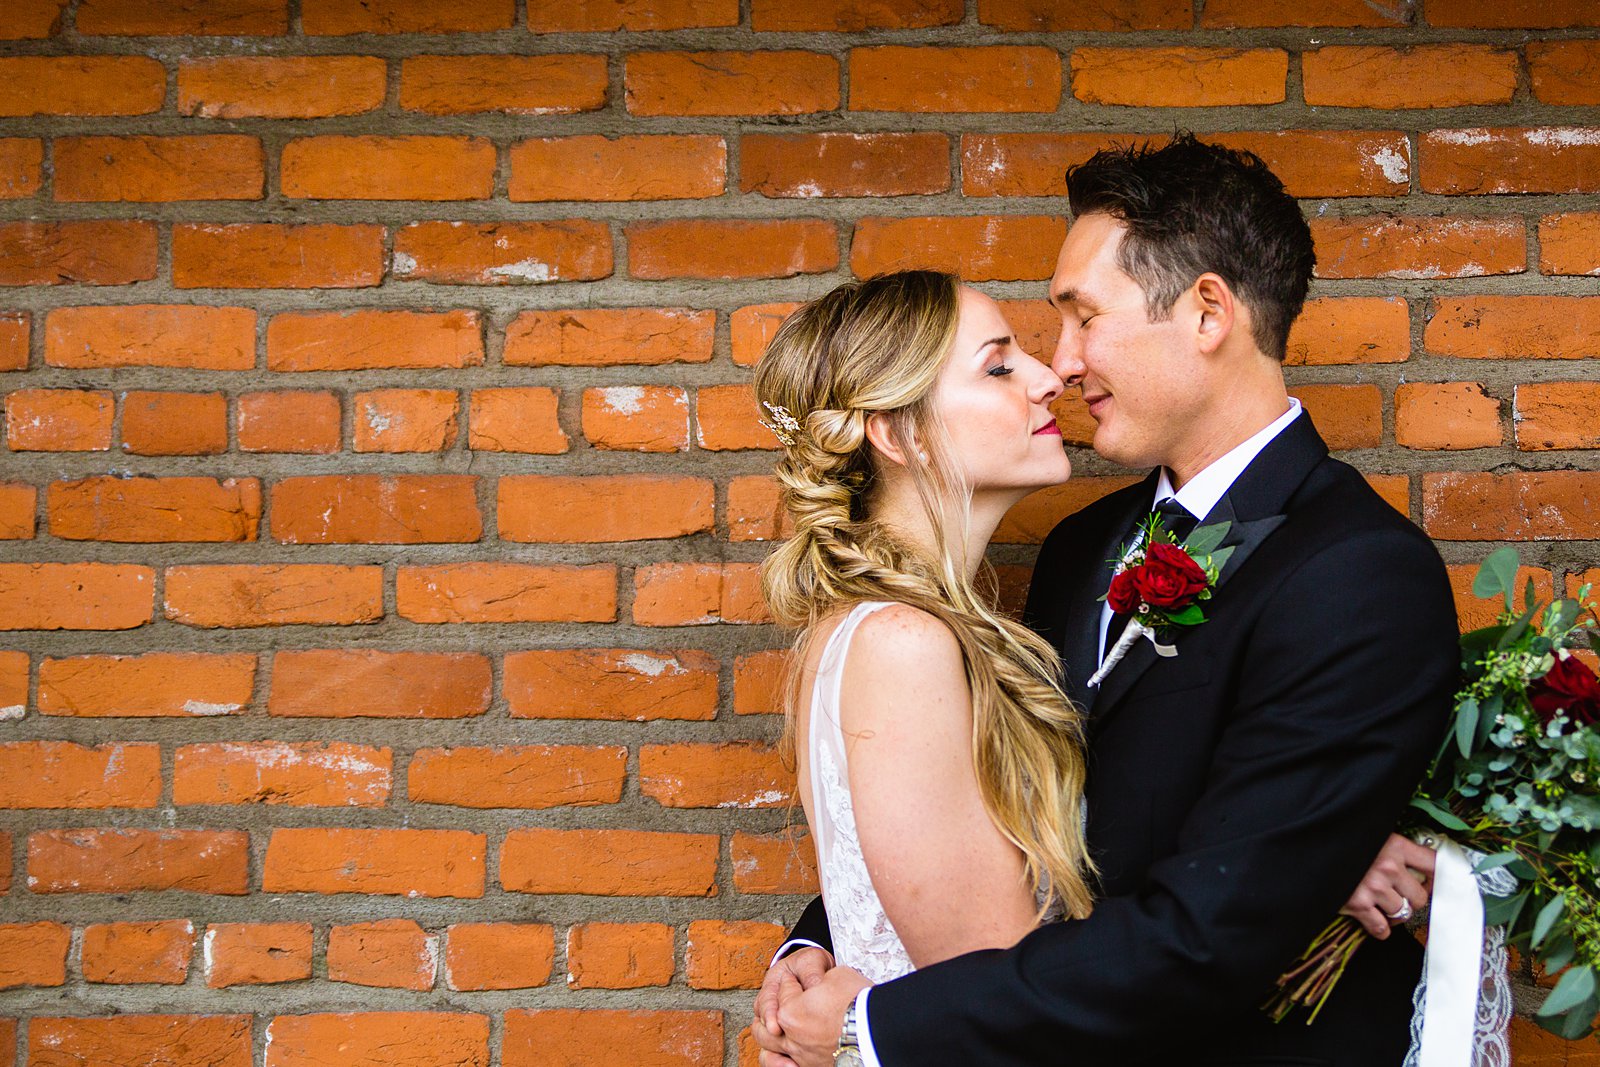 Bride and groom share an intimate moment during their downtown Flagstaff wedding by Flagstaff wedding photographer PMA Photography.